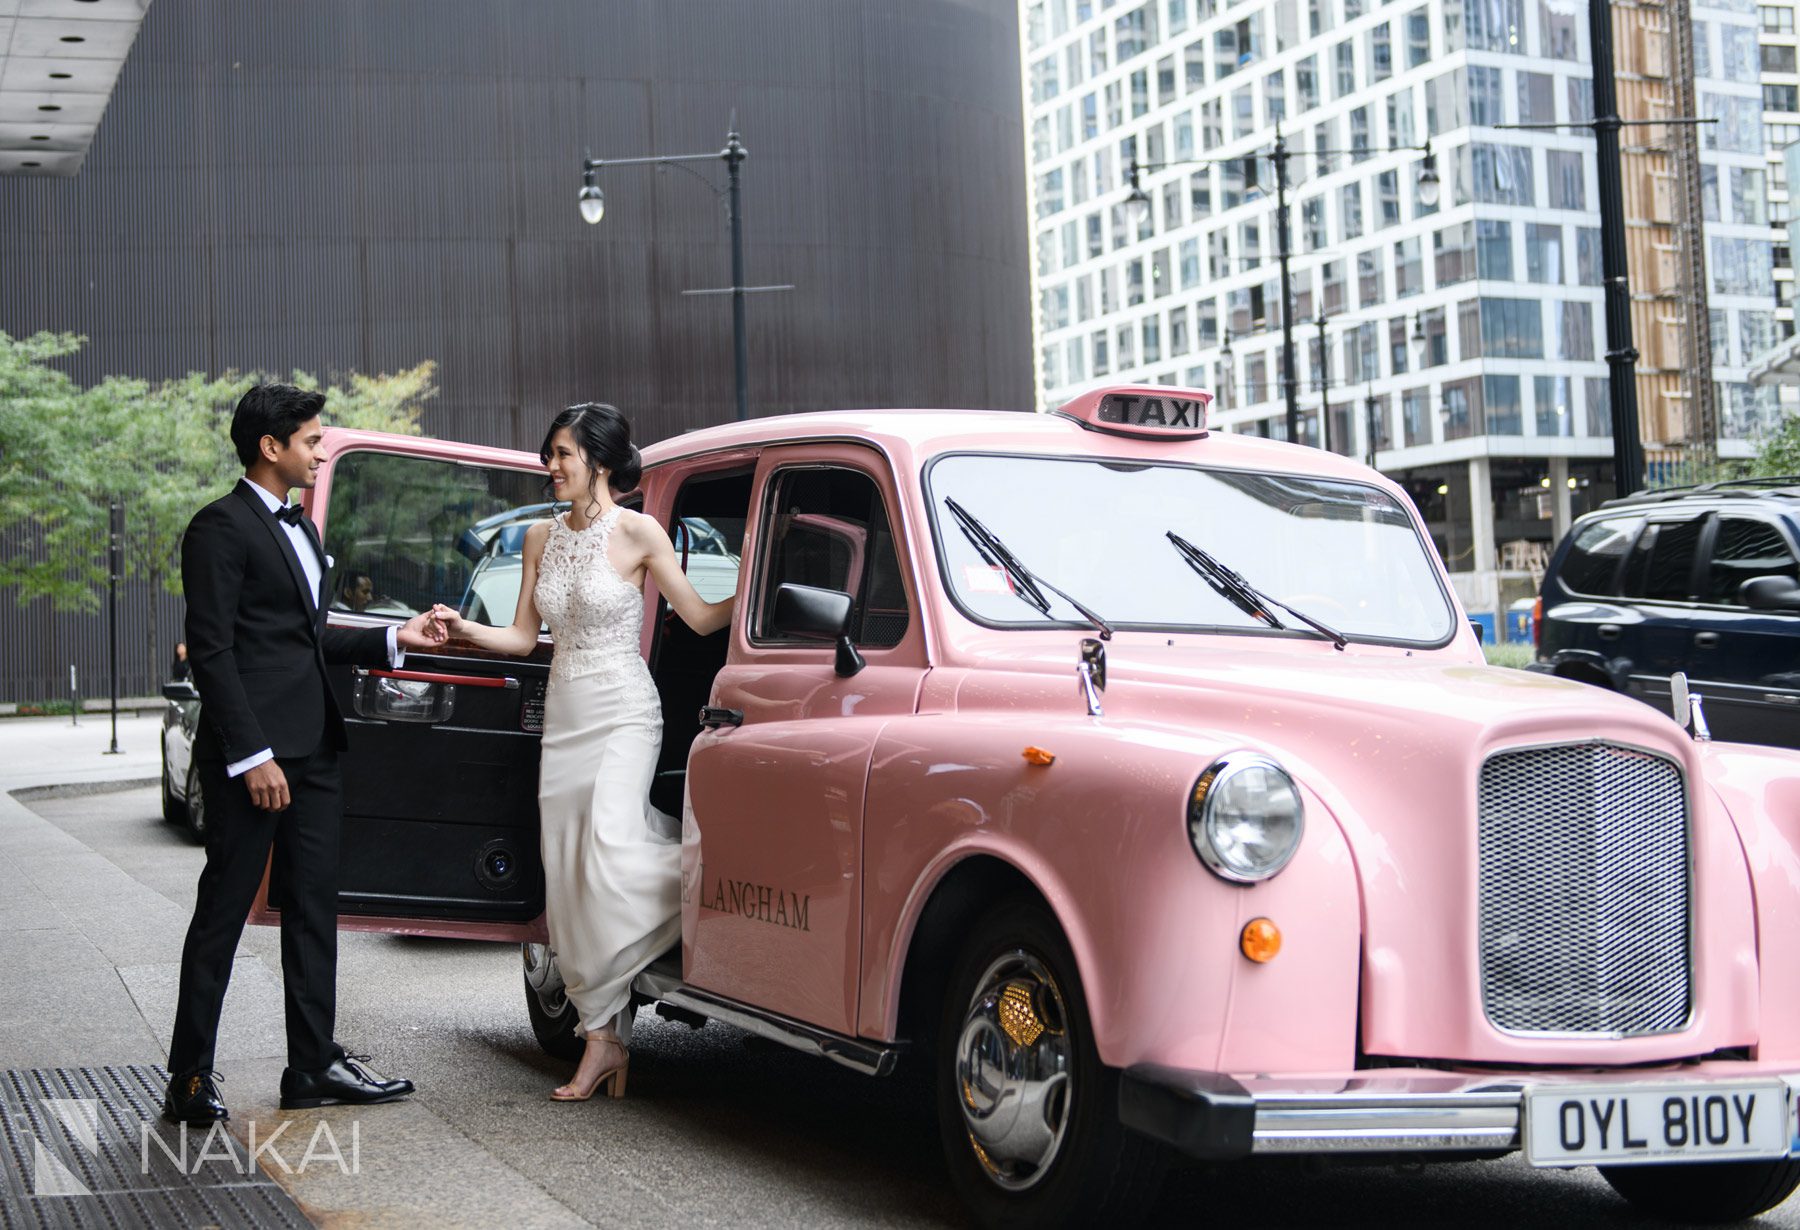 chicago Langham wedding photography pink taxi bride groom